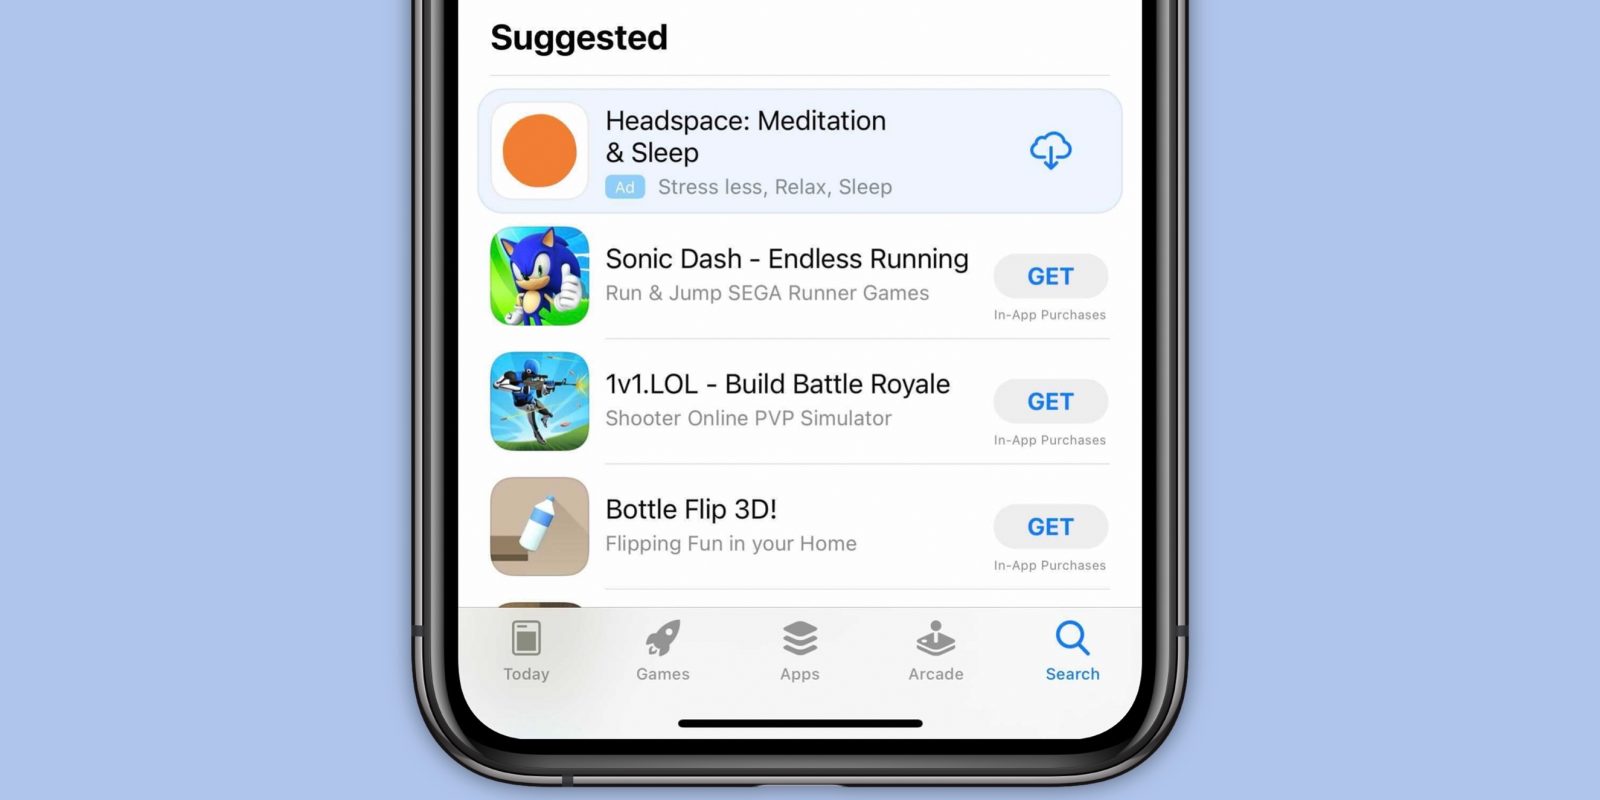 A better search for the App Store